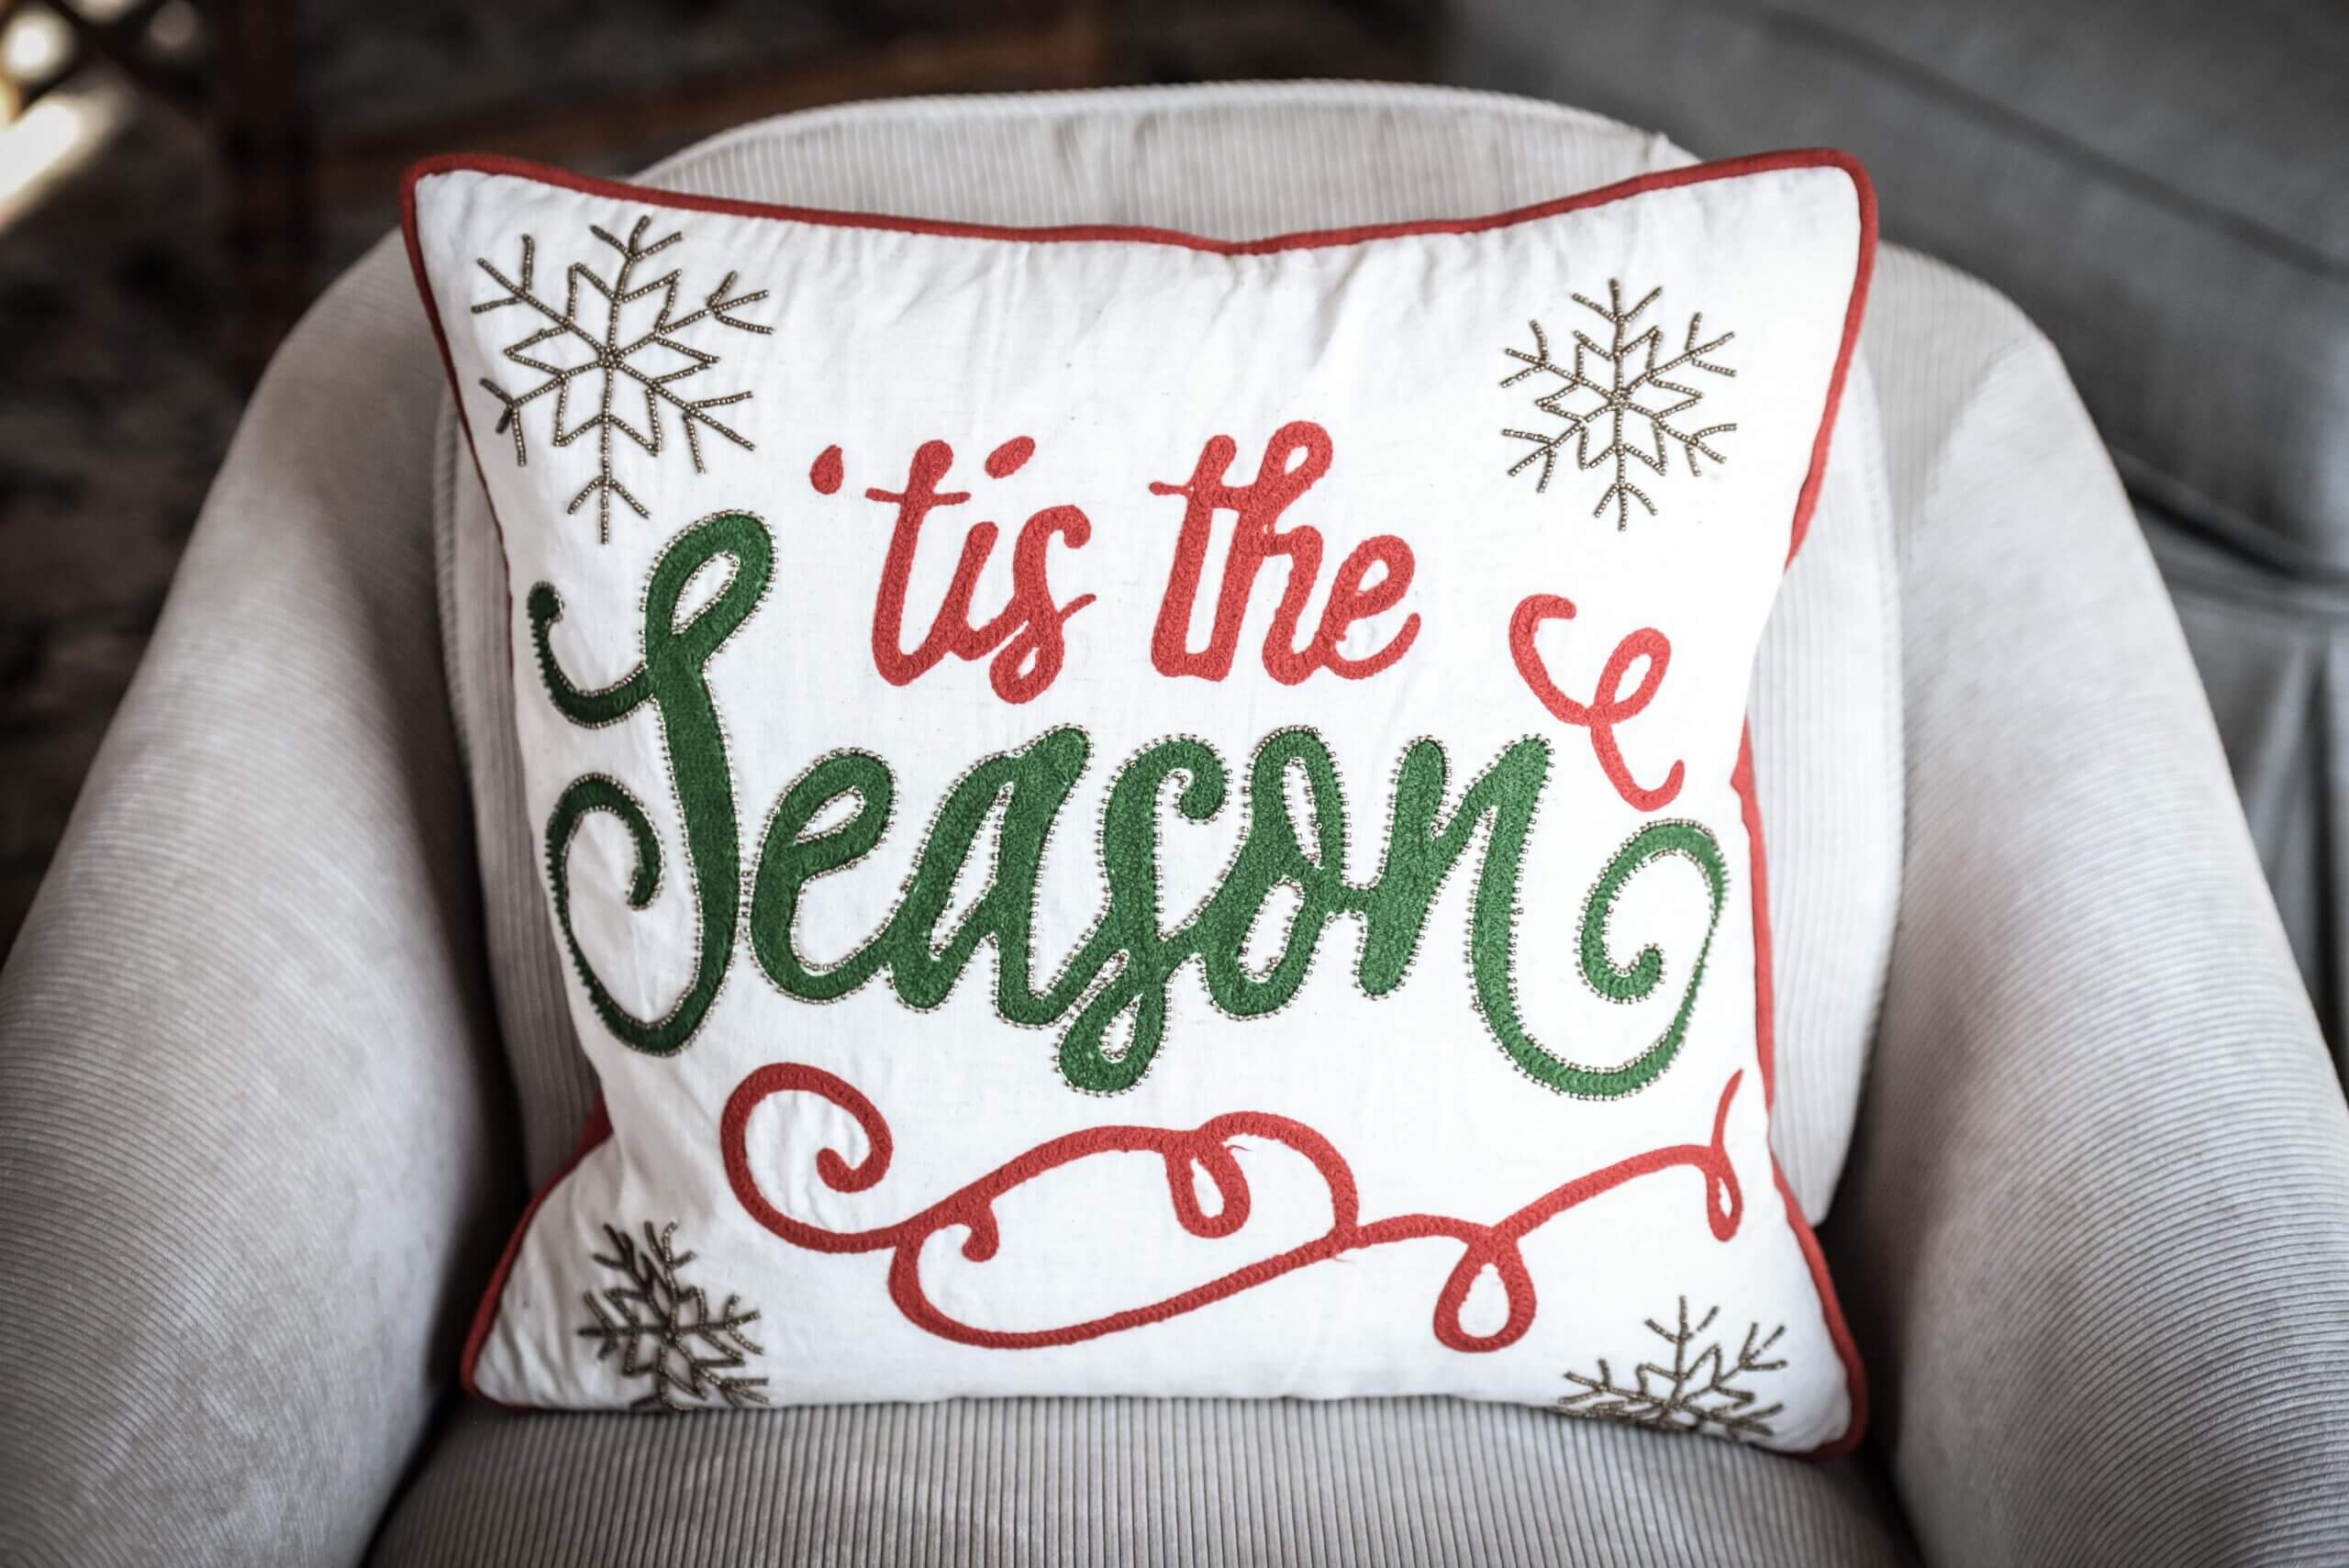 A view of a pillow on a seat. The pillow reads "tis the season" in red and green text.